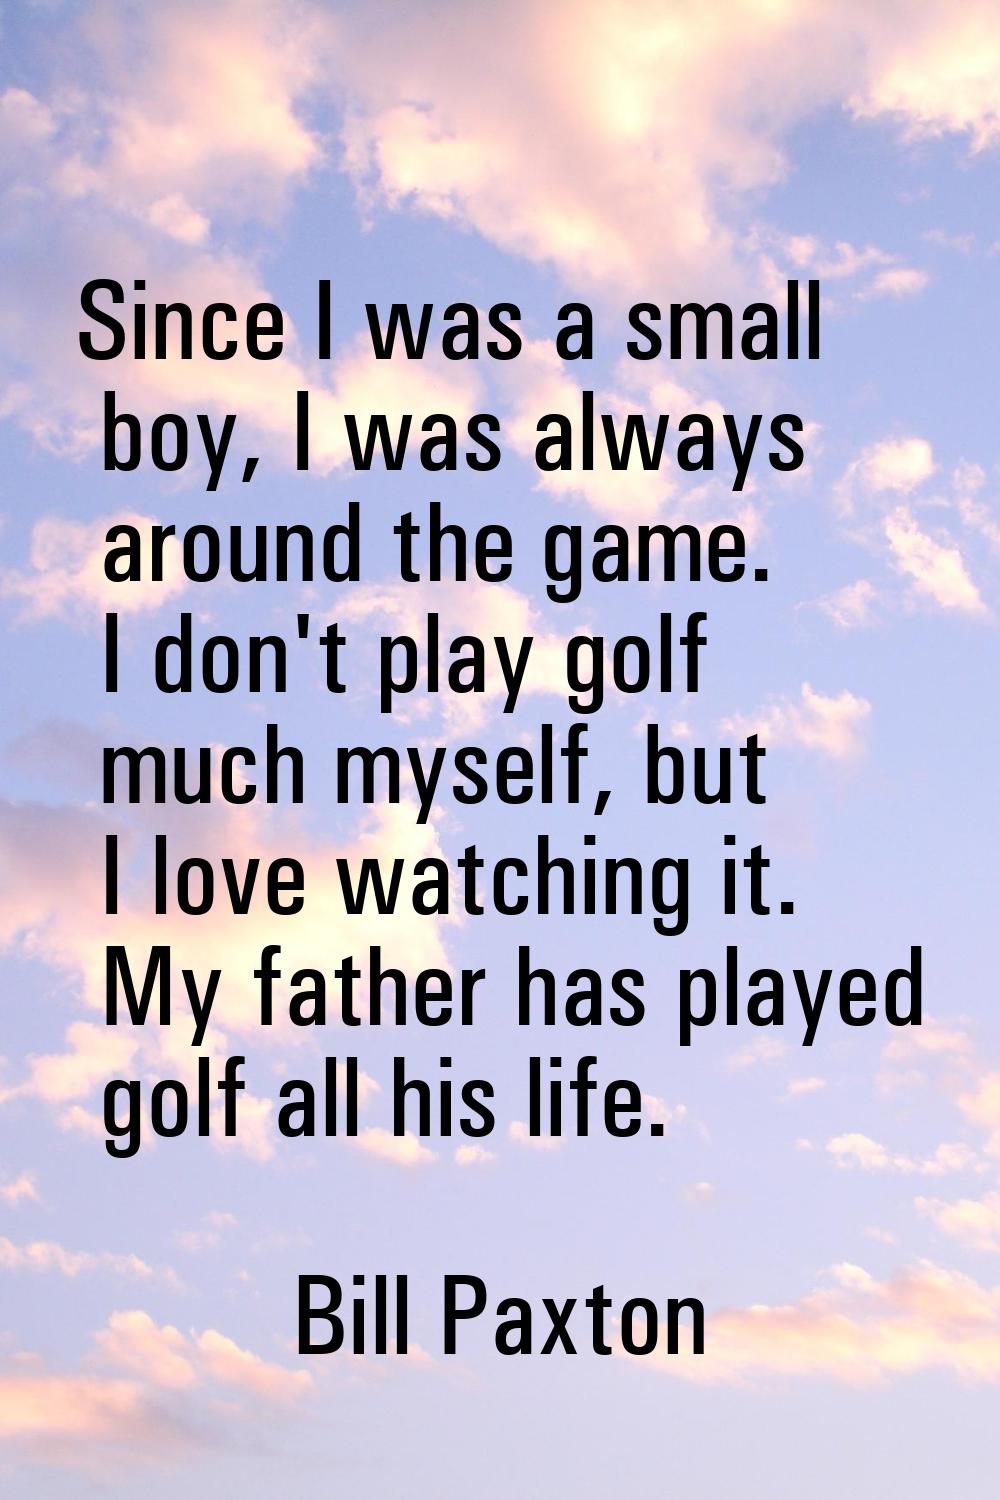 Since I was a small boy, I was always around the game. I don't play golf much myself, but I love wa